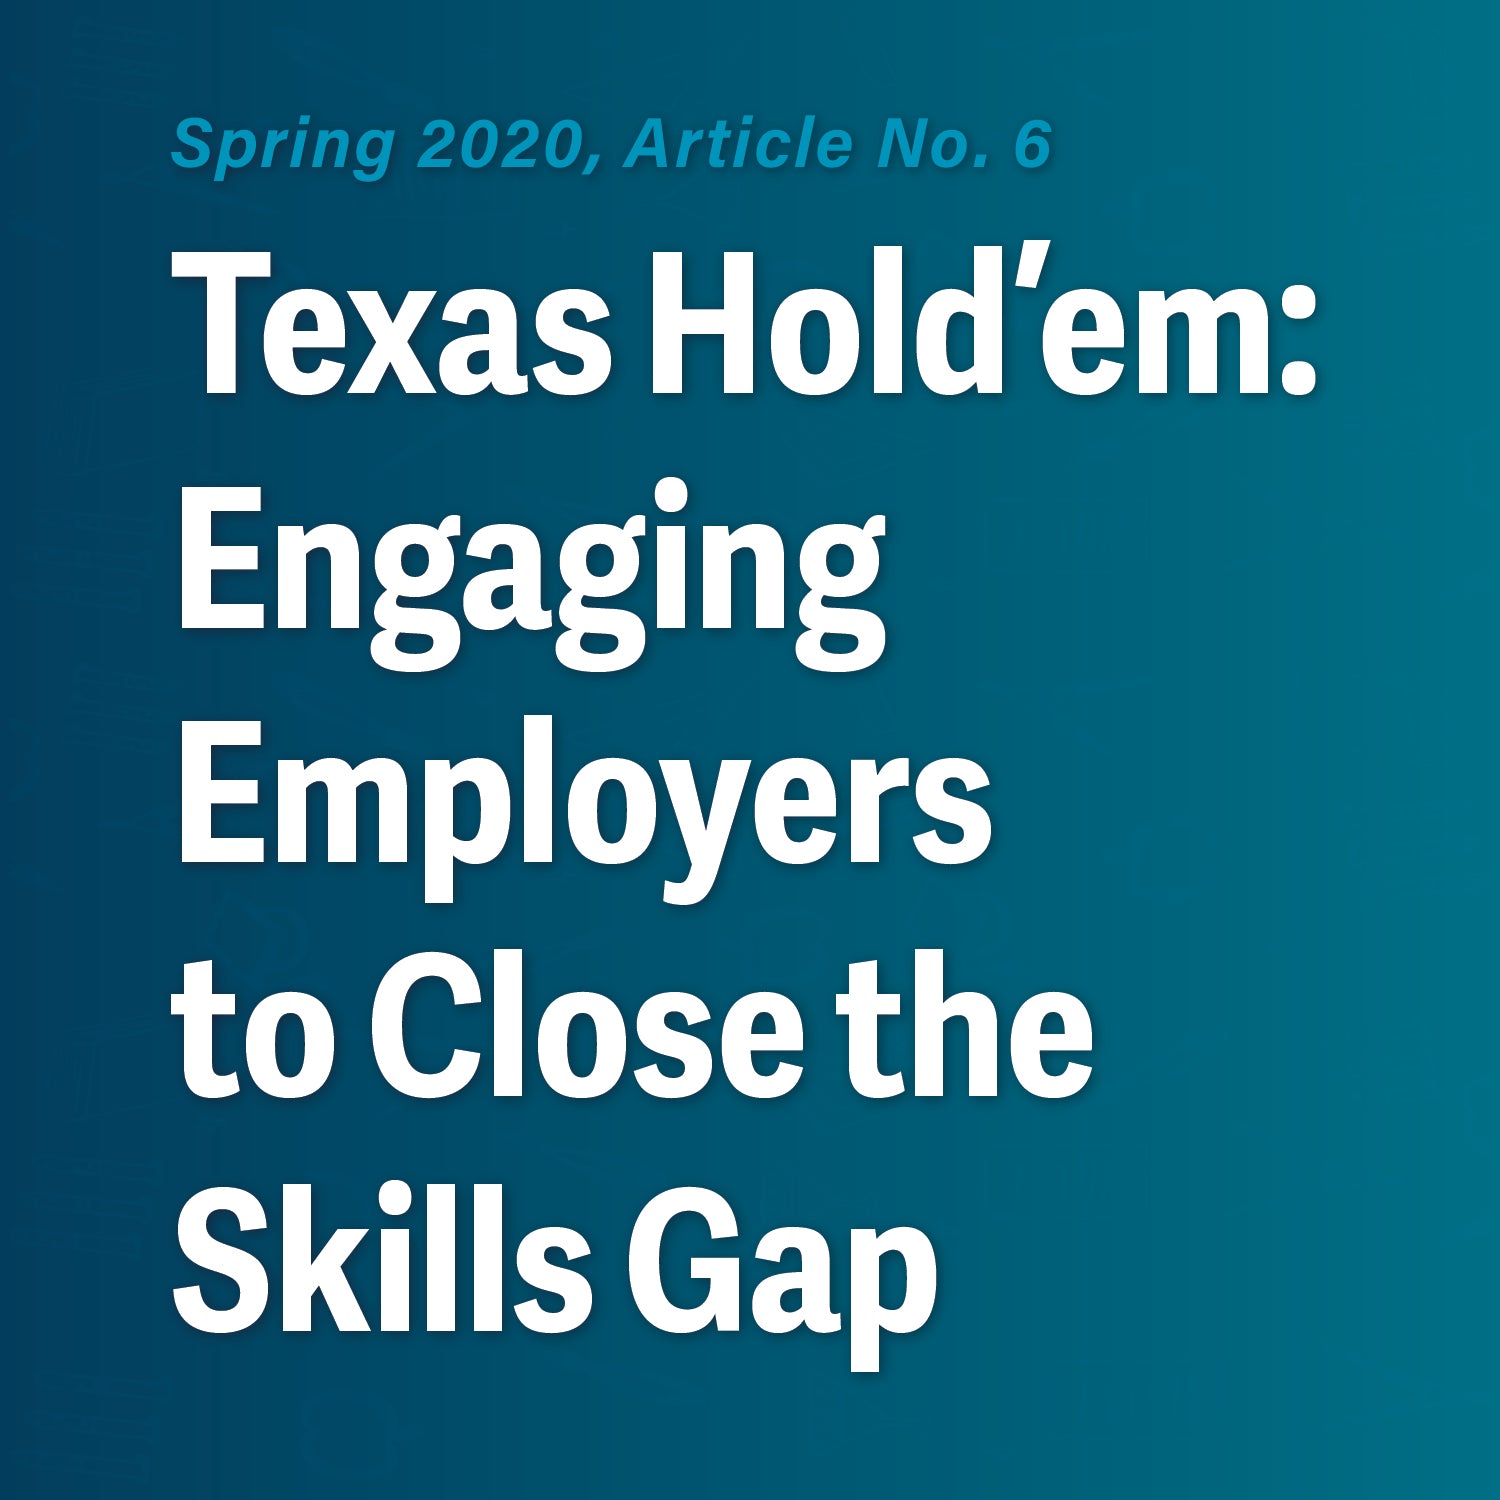 Texas Hold’em: Engaging Employers to Close the Skills Gap